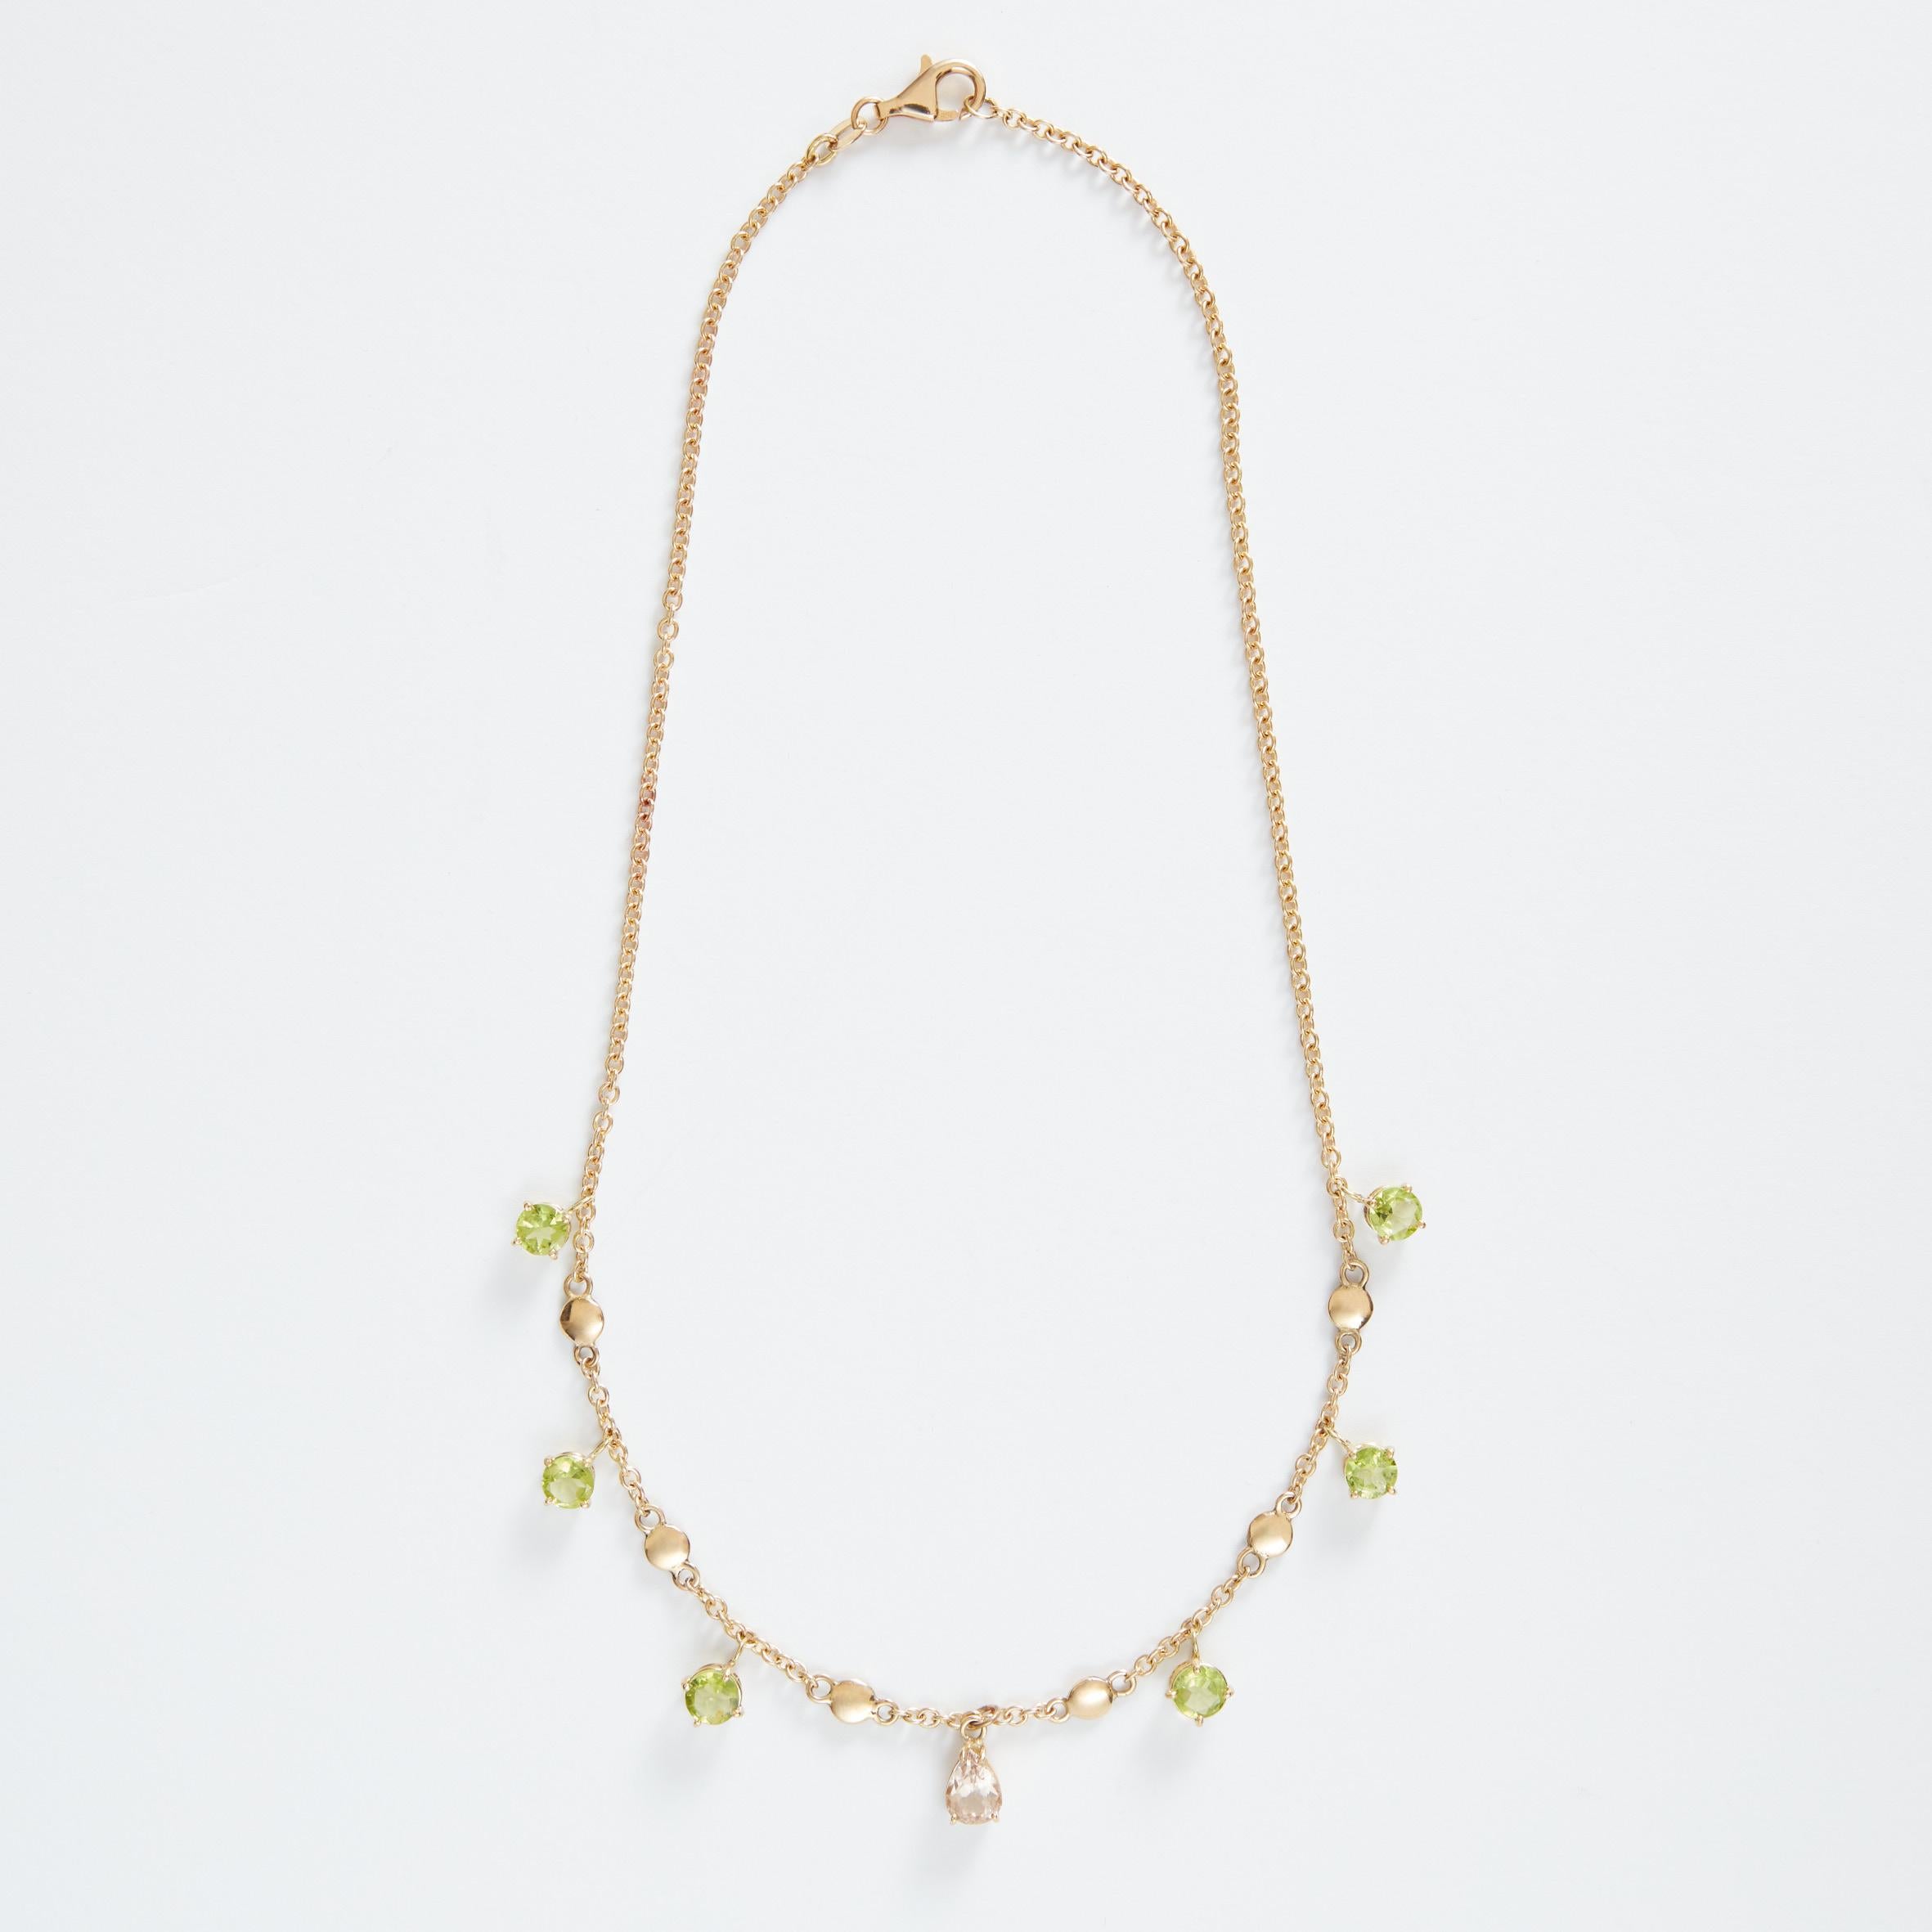 Radiant Cut Peridot Sapphire Drop 18 k Gold Necklace For Sale